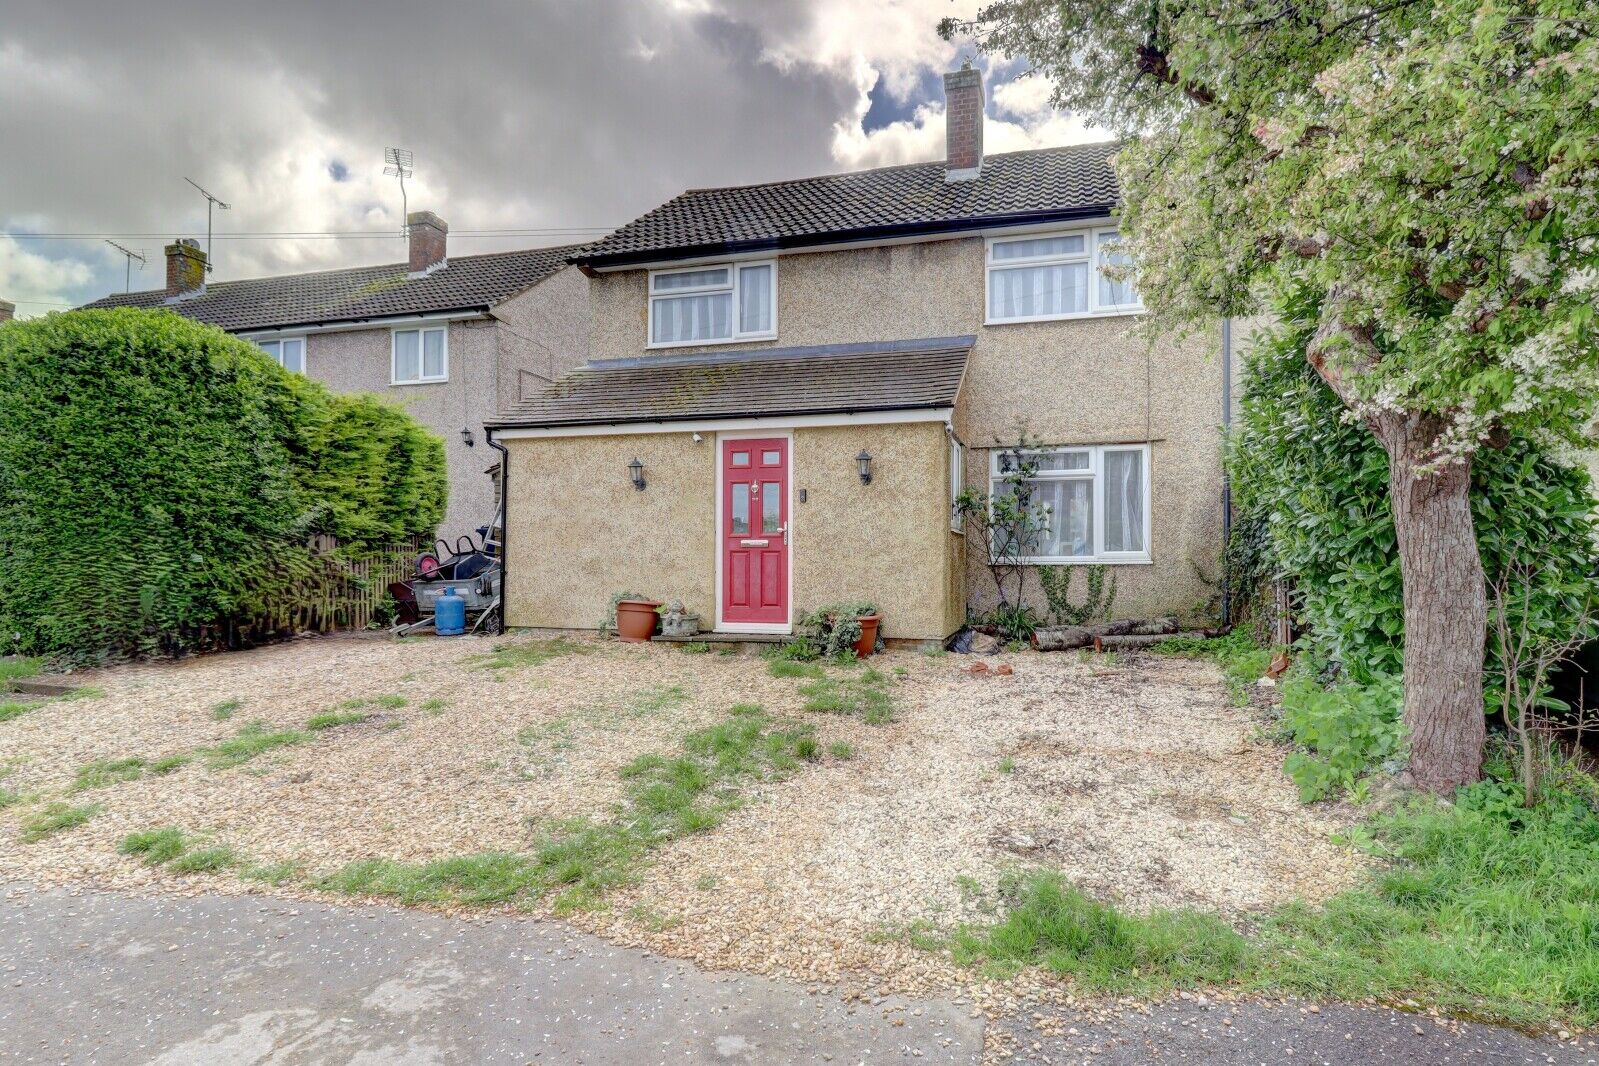 3 bedroom end terraced house for sale Woodfield Road, Princes Risborough, HP27, main image